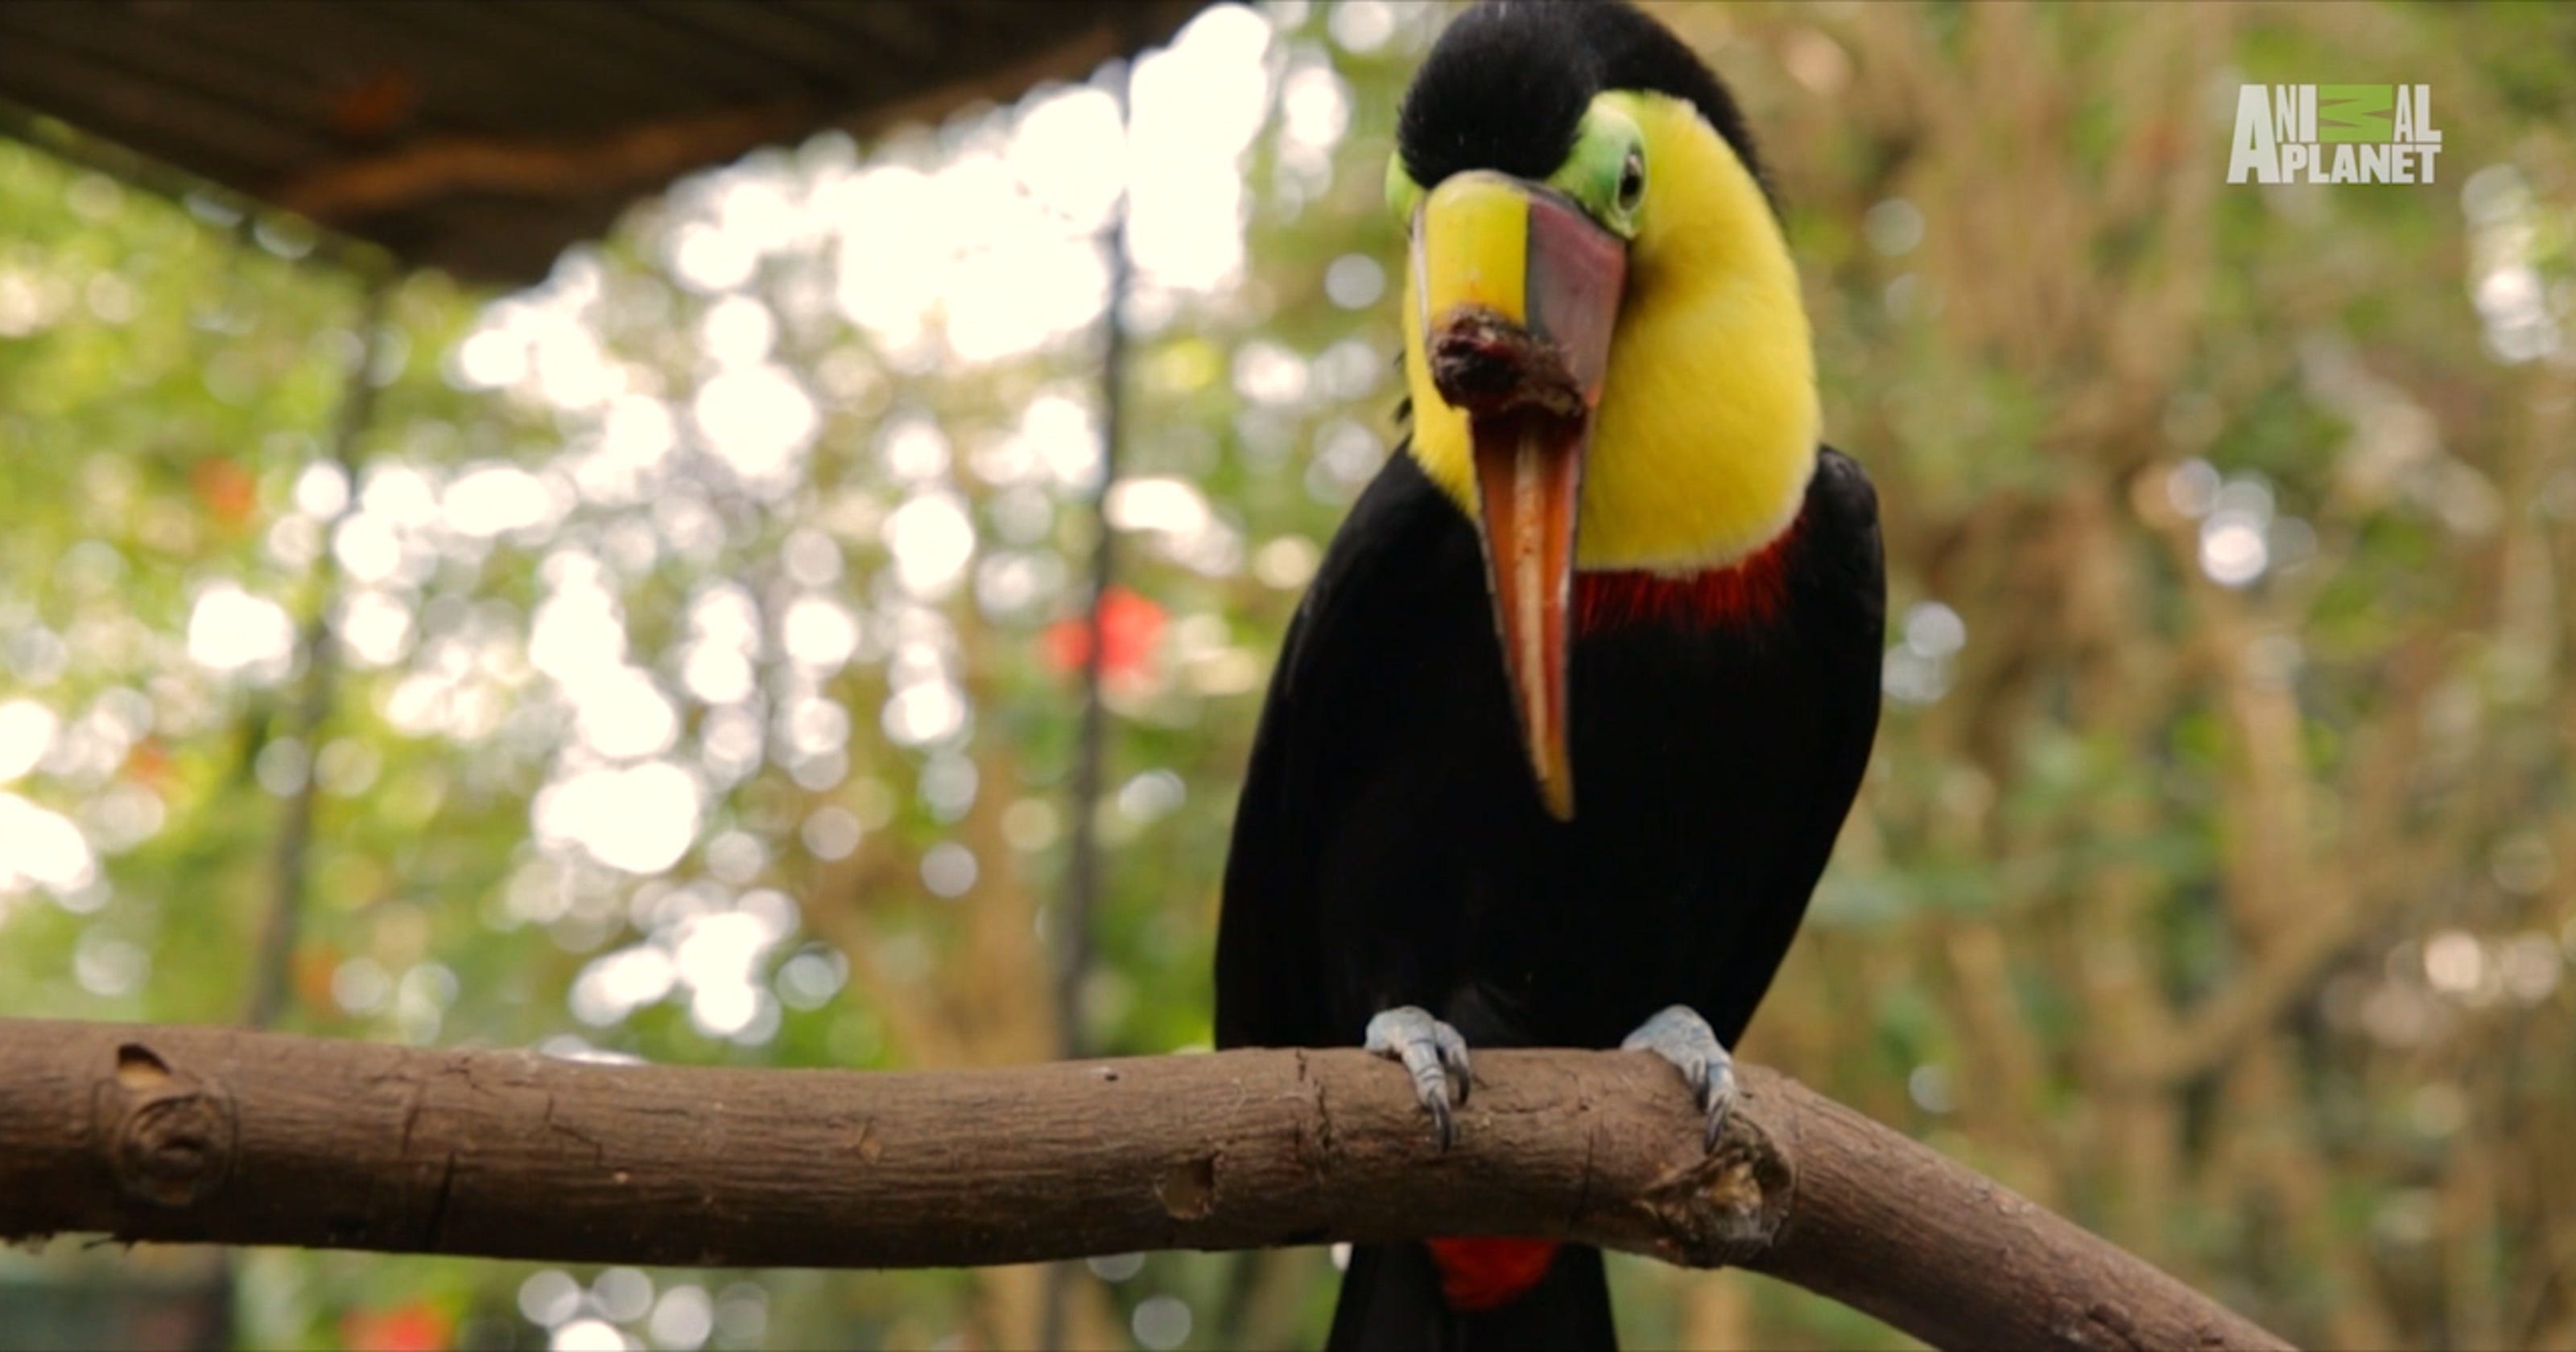 After abuse, toucan gets second chance with new beak3200 x 1680